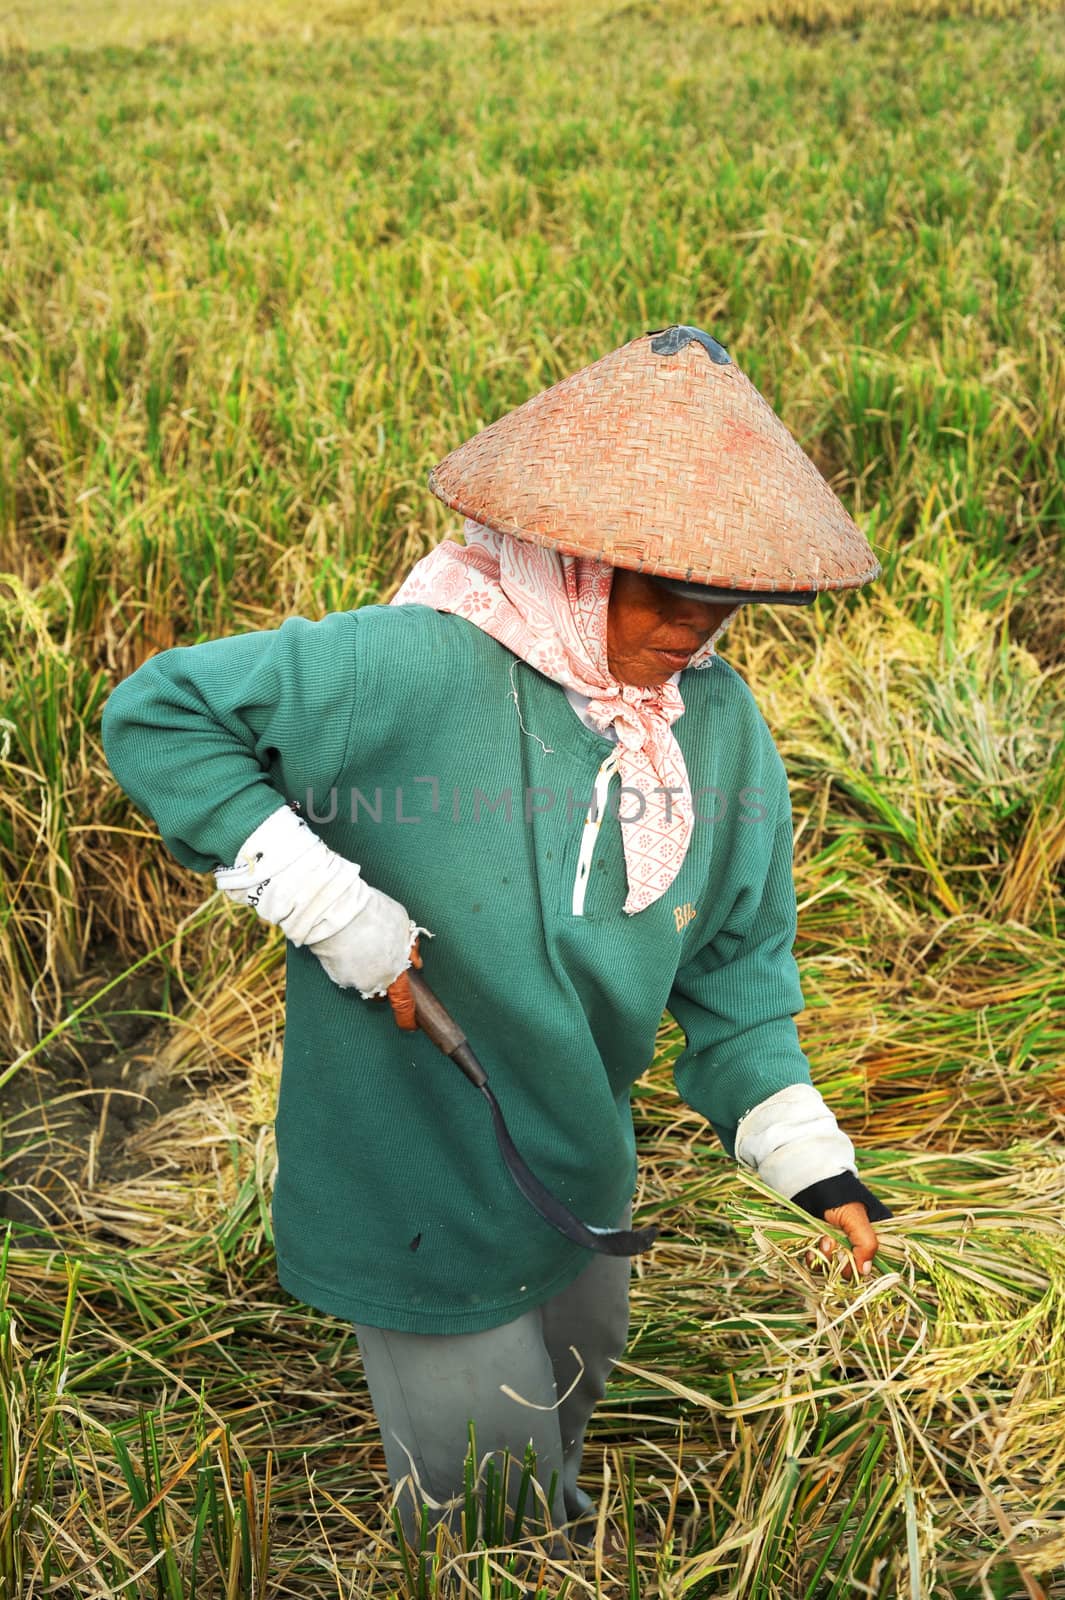 Bali, Indonesia - April 19,2011:  Local women working on the rice field. Rice, to the Balinese, is more than just the staple food; it is an integral part of the Balinese culture.